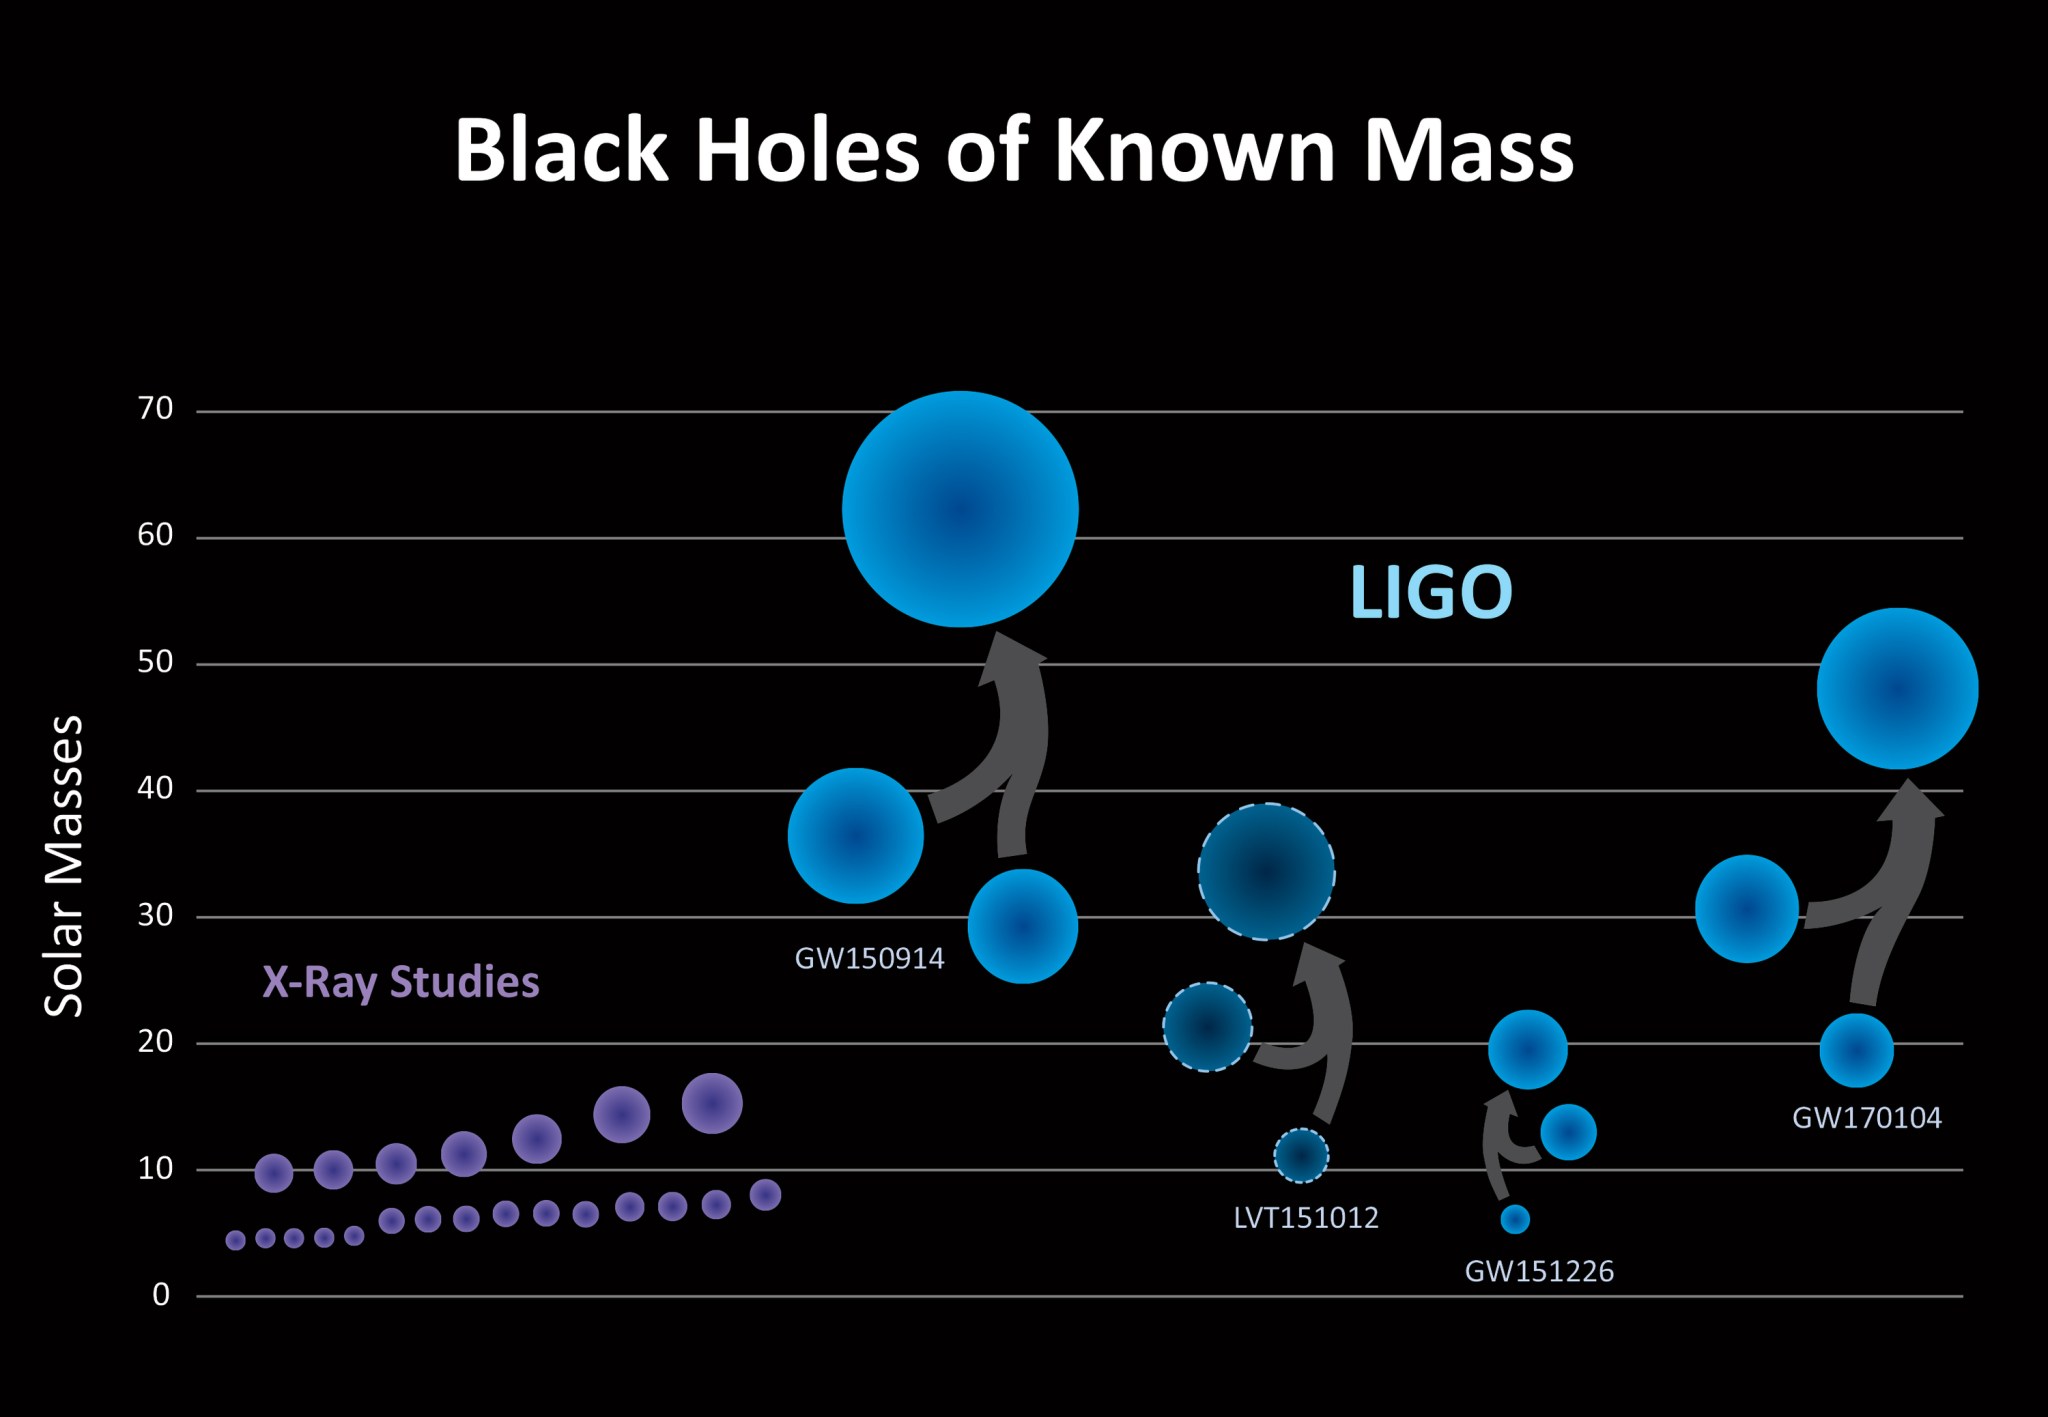 A chart shows a series of purple circles (lower left) representing the masses of black holes known by X-ray studies, which peak at about 20 Suns. Larger blue circles show merged black holes detected by gravitational waves, all of which exceed 20 solar masses.